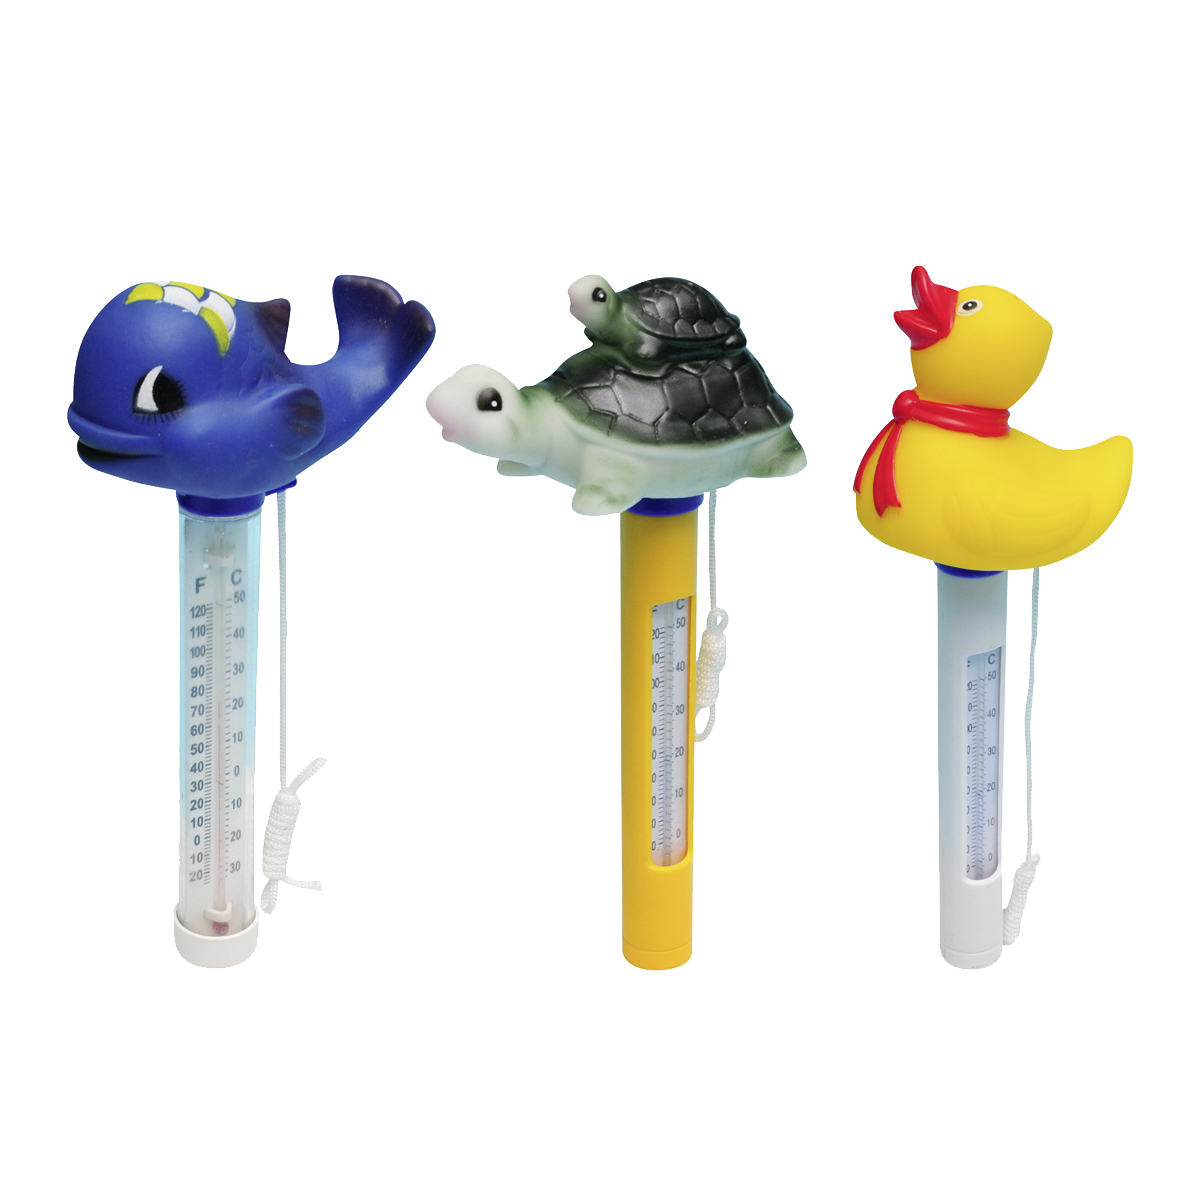 Smart Pool-Thermometer Ente